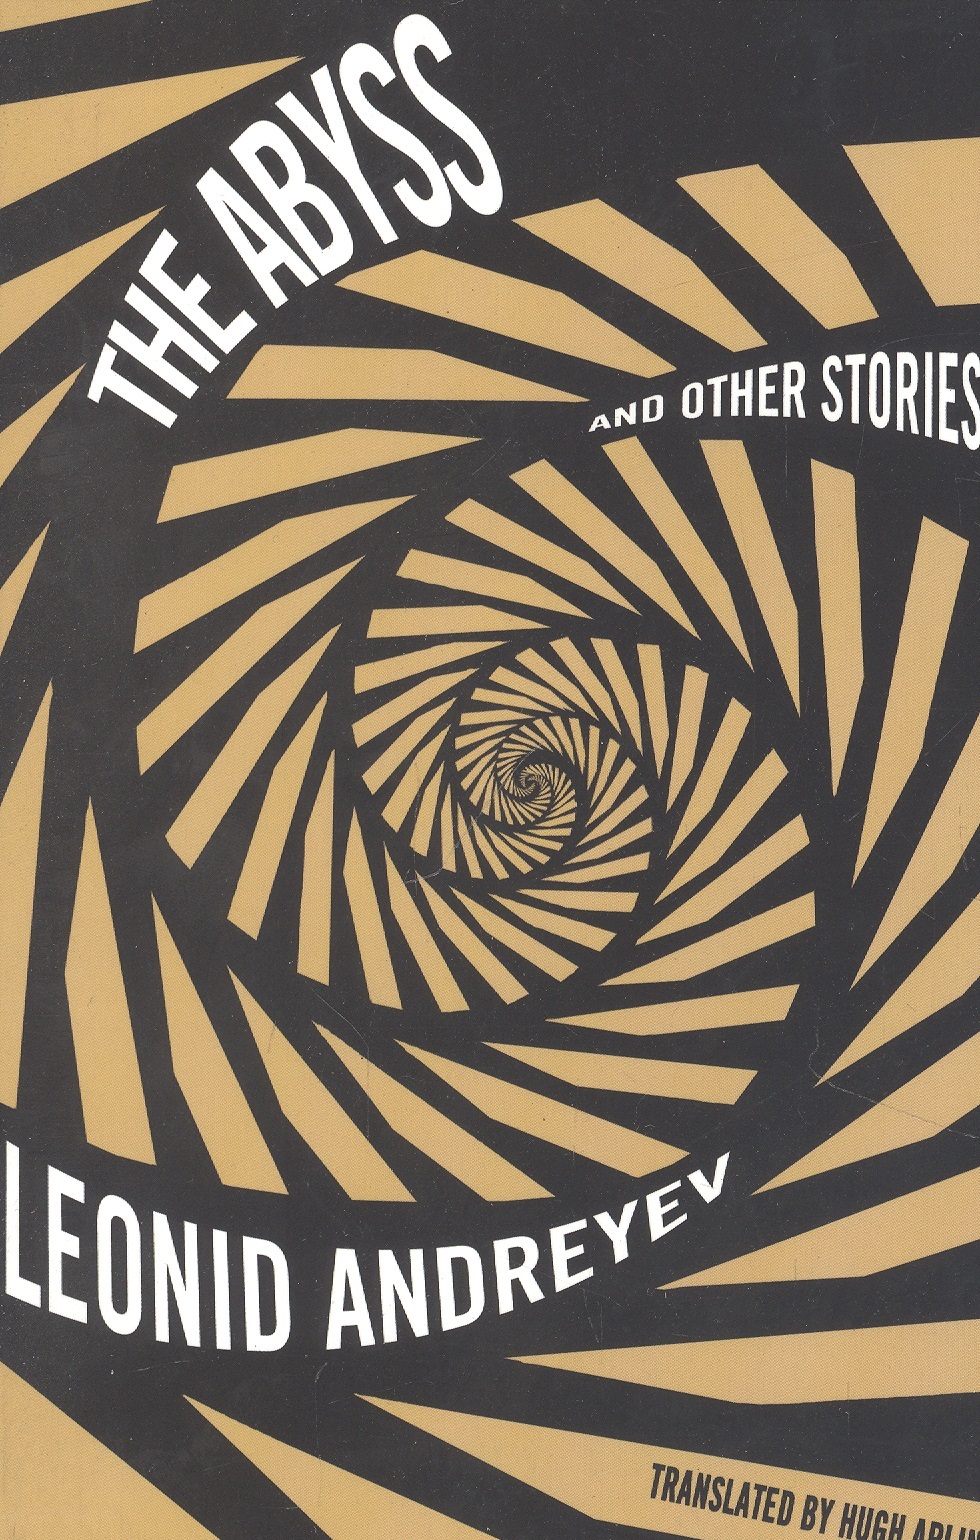 rendell r the thief and other stories Abyss and Other Stories